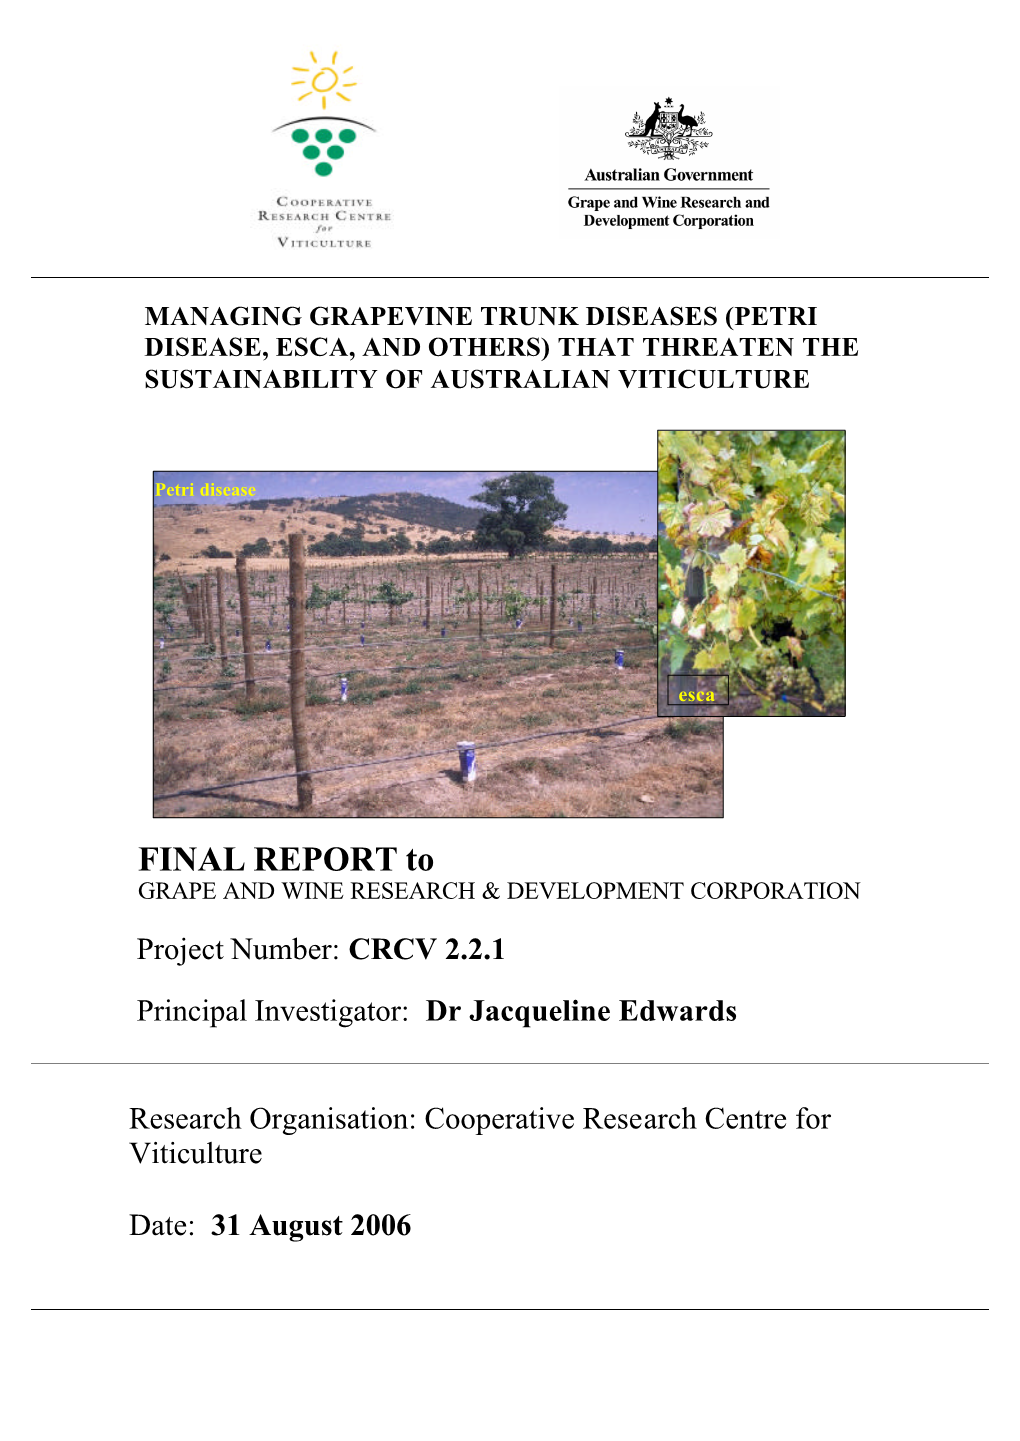 Managing Grapevine Trunk Diseases (Petri Disease, Esca, and Others) That Threaten the Sustainability of Australian Viticulture